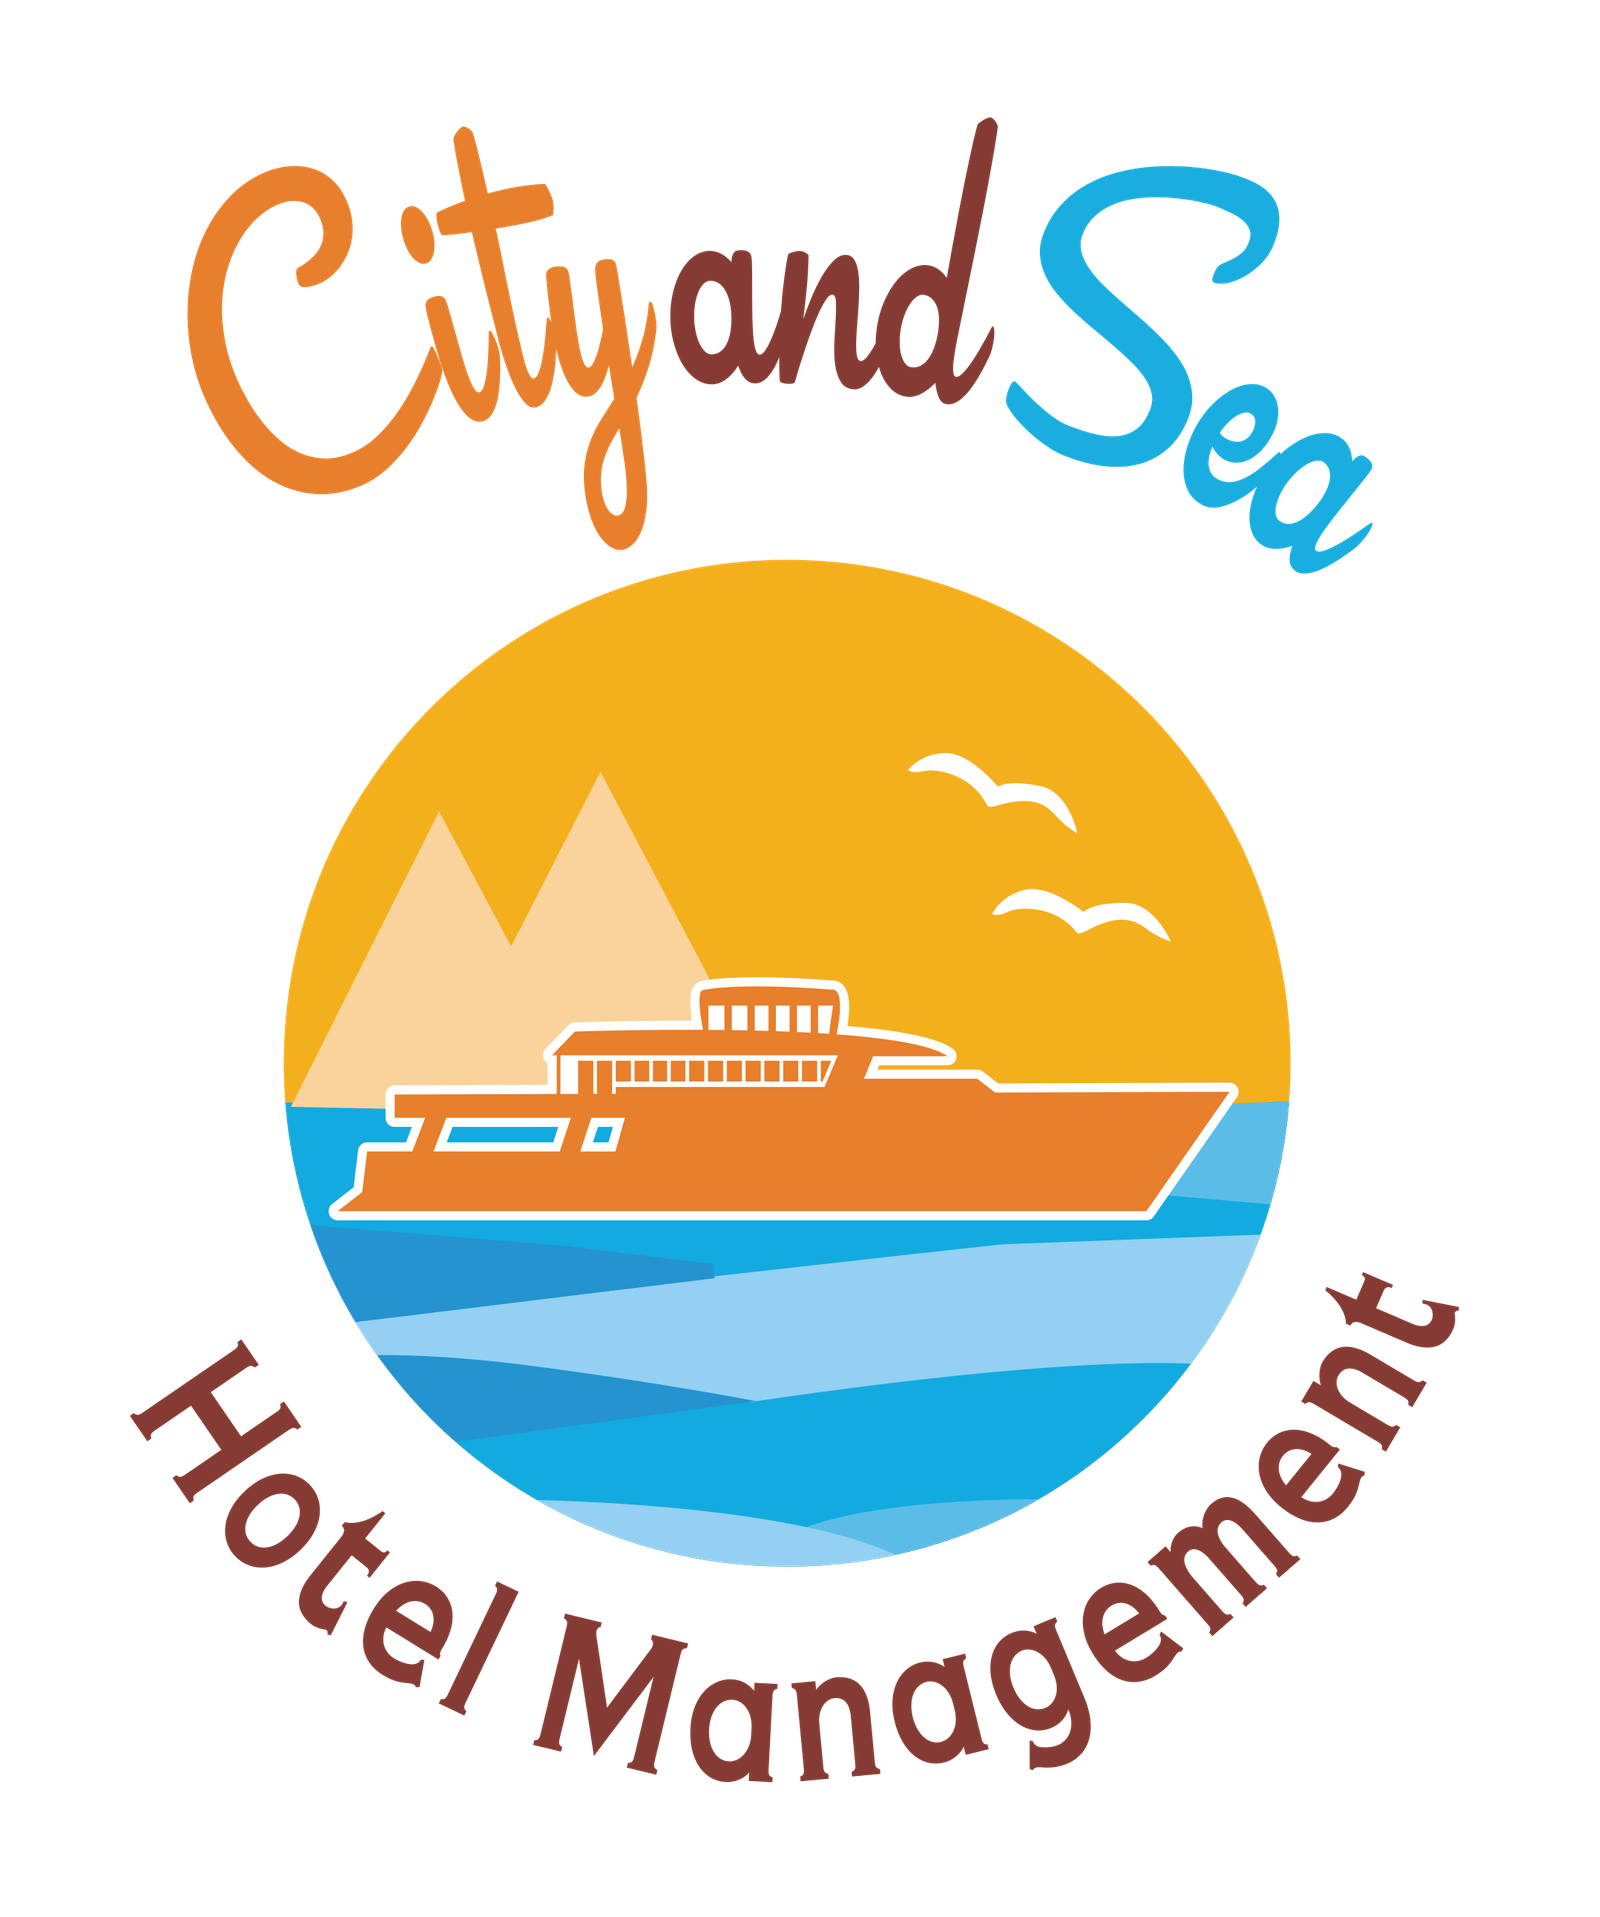 City and Sea Hotel Management